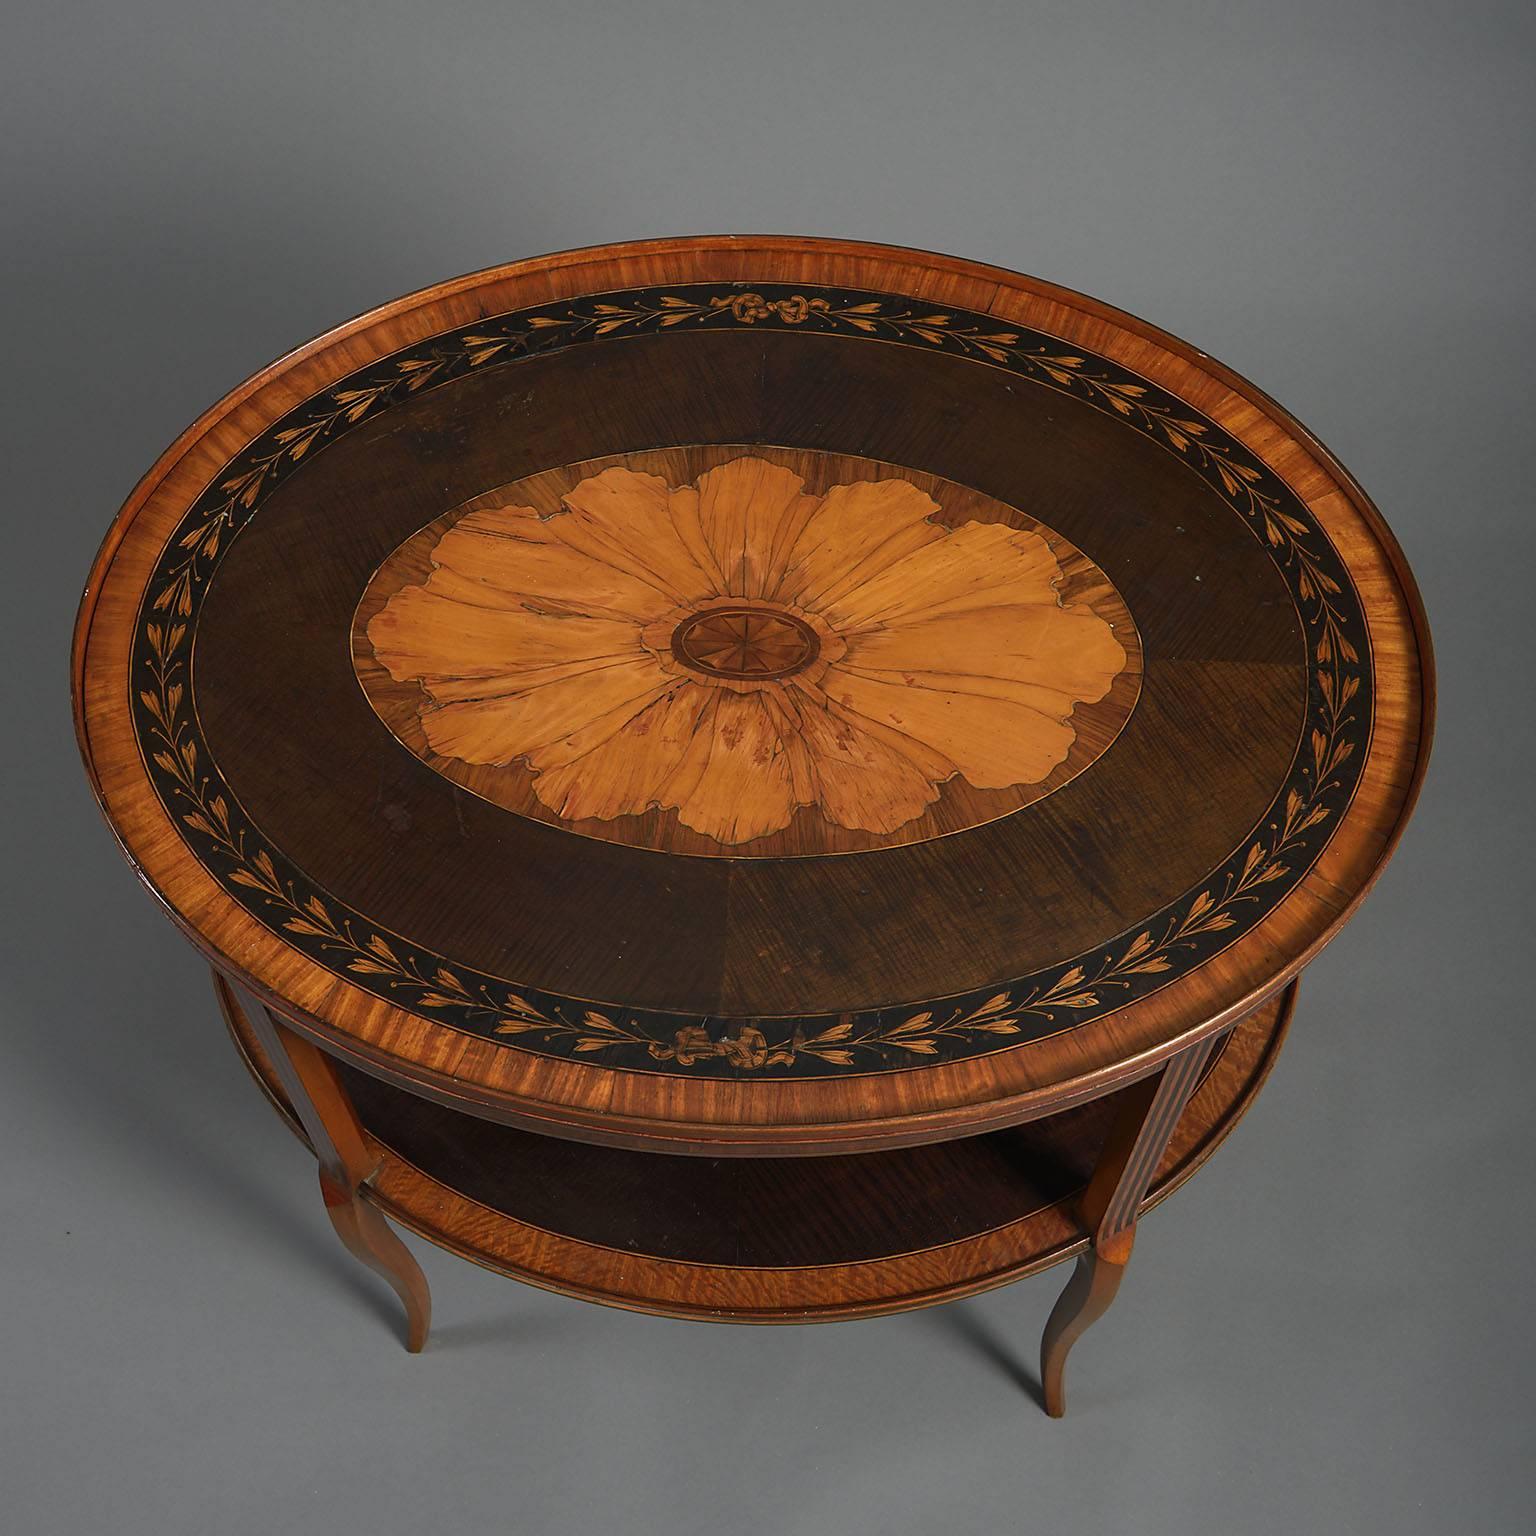 George III oval tray-top table
Inlaid in satinwood and sycamore with large central patera and an outer border of engraved leaves, raised on a later satinwood stand to form a table, with conforming under-shelf

English, circa 1785 and